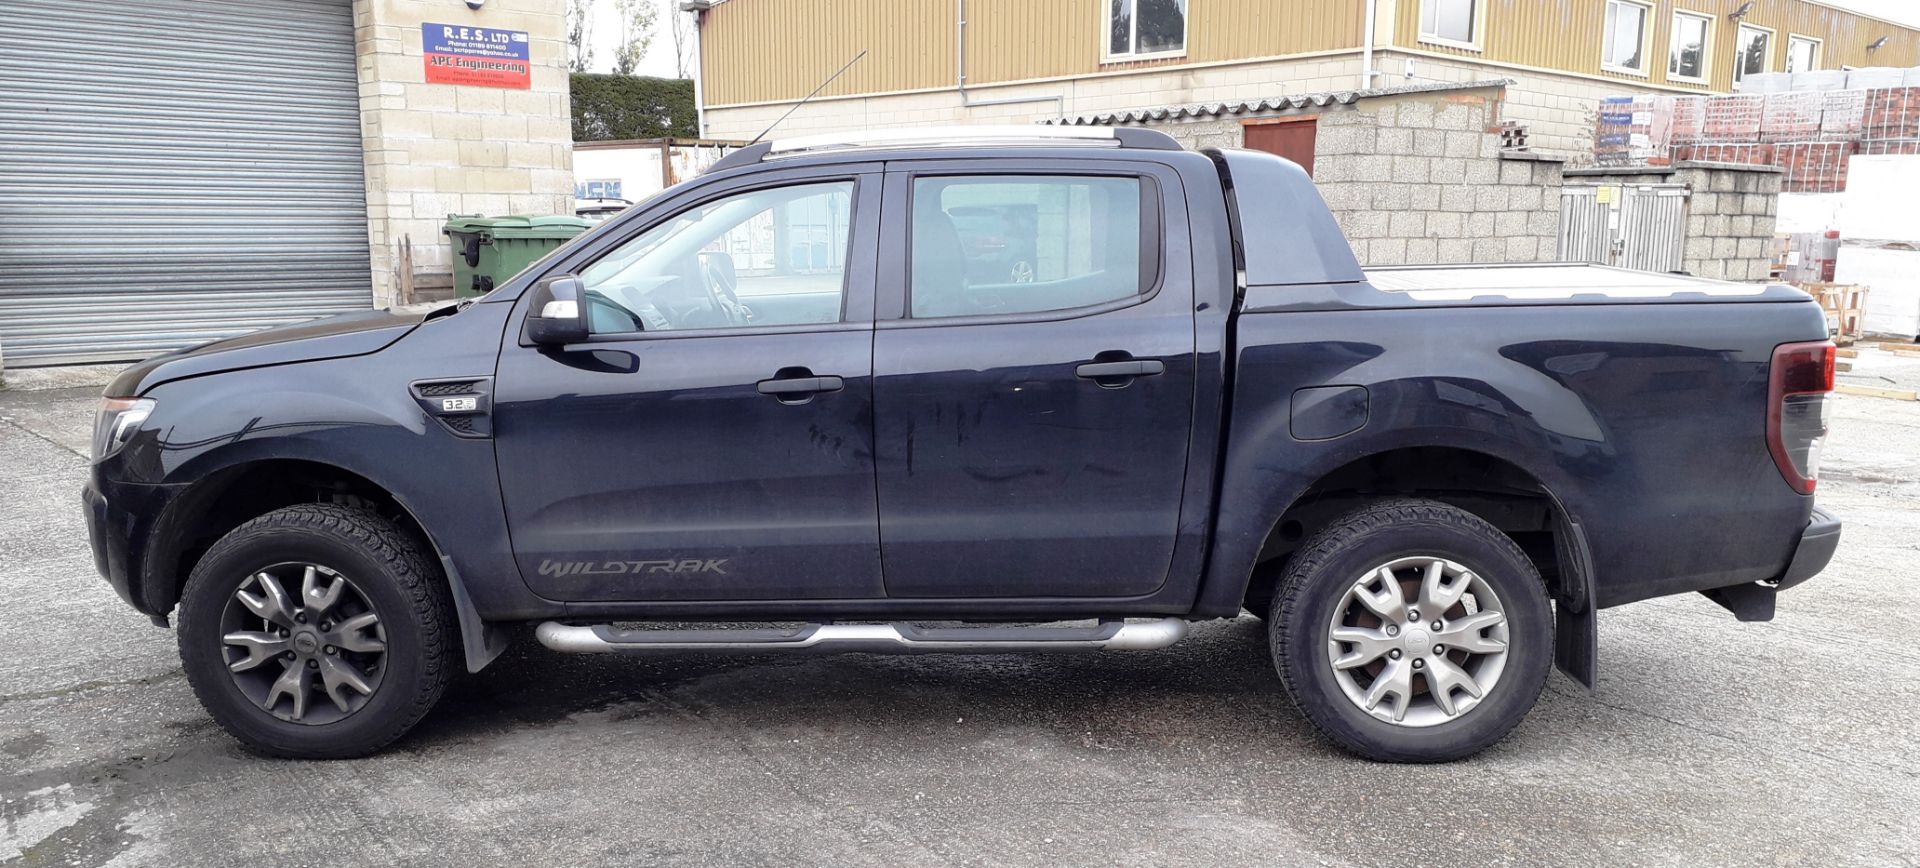 Ford Ranger Wildtrax 4 x 4 TDCI Automatic Pick Up, - Image 4 of 14